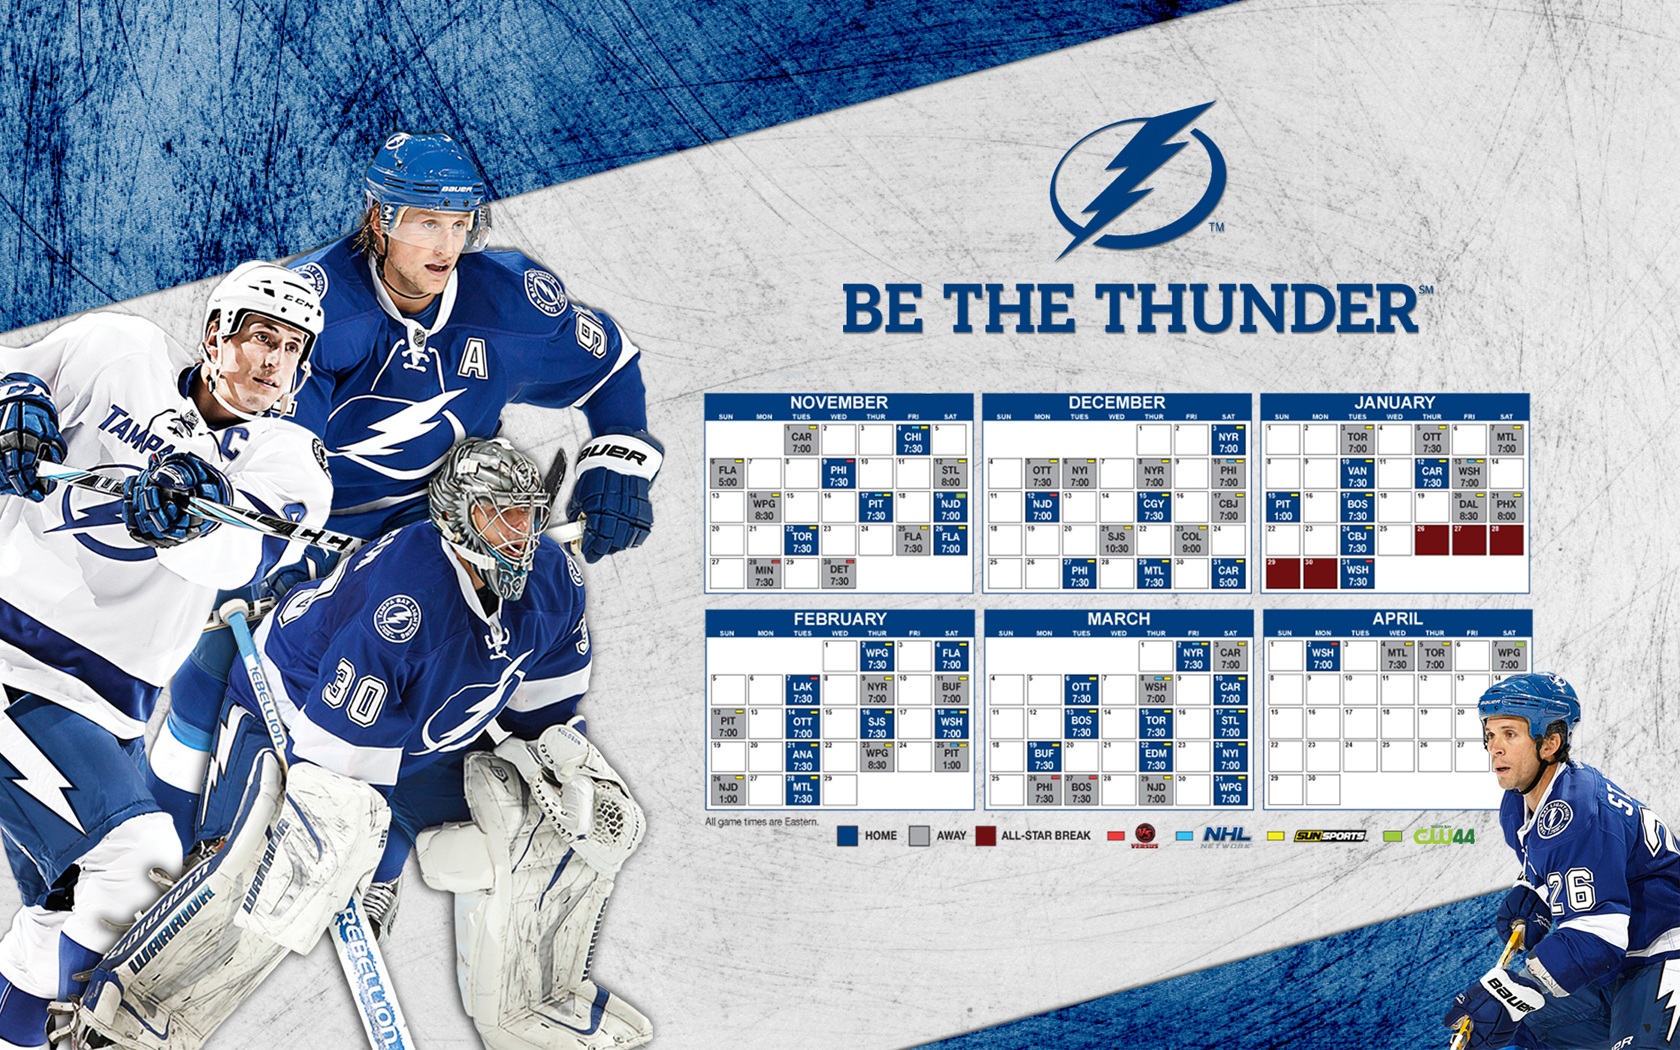 Tampa Bay Lightning images TBL 2011 12 Schedule HD wallpaper and